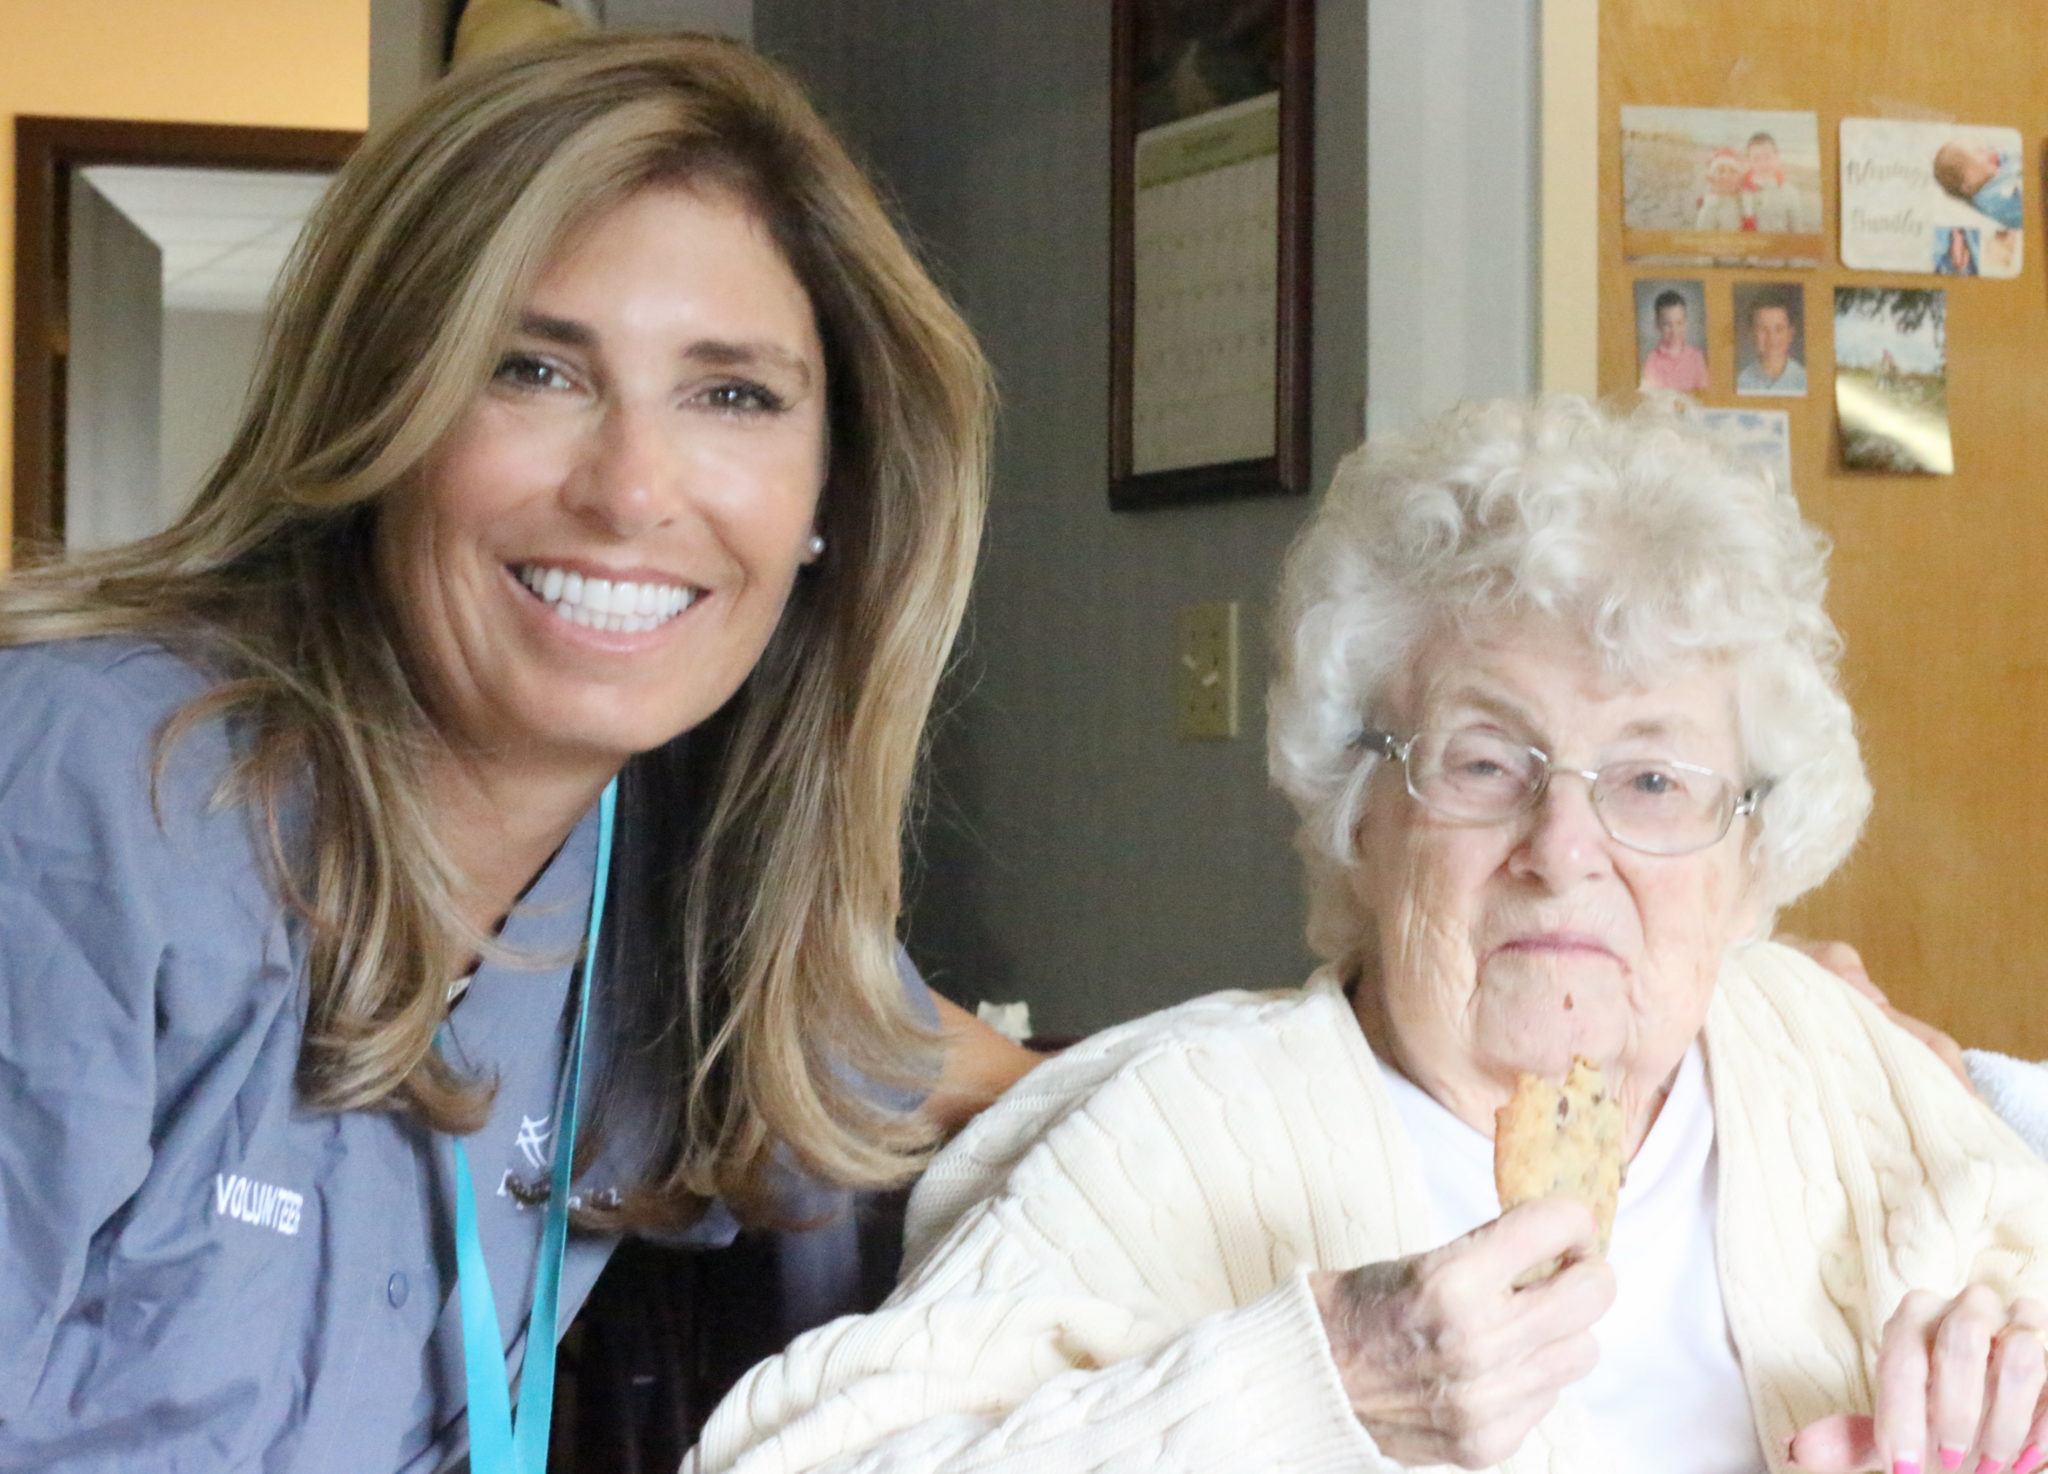 A female hospice volunteer poses with an elderly female patient